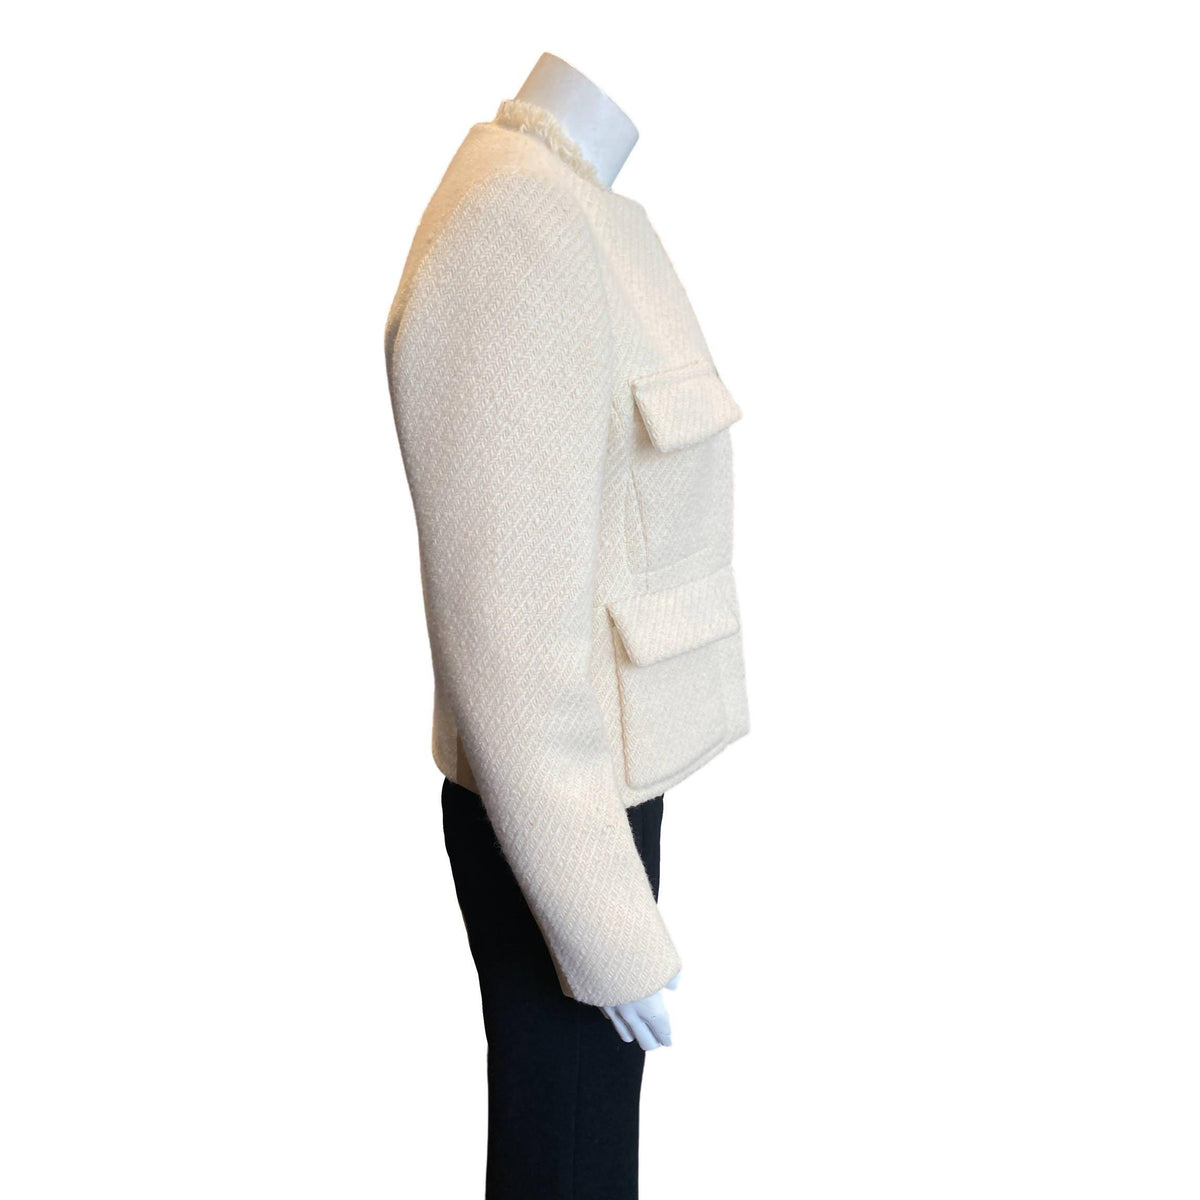 Pre-Owned LOUIS VUITTON Cream Wool Army Jacket | Size S - theREMODA